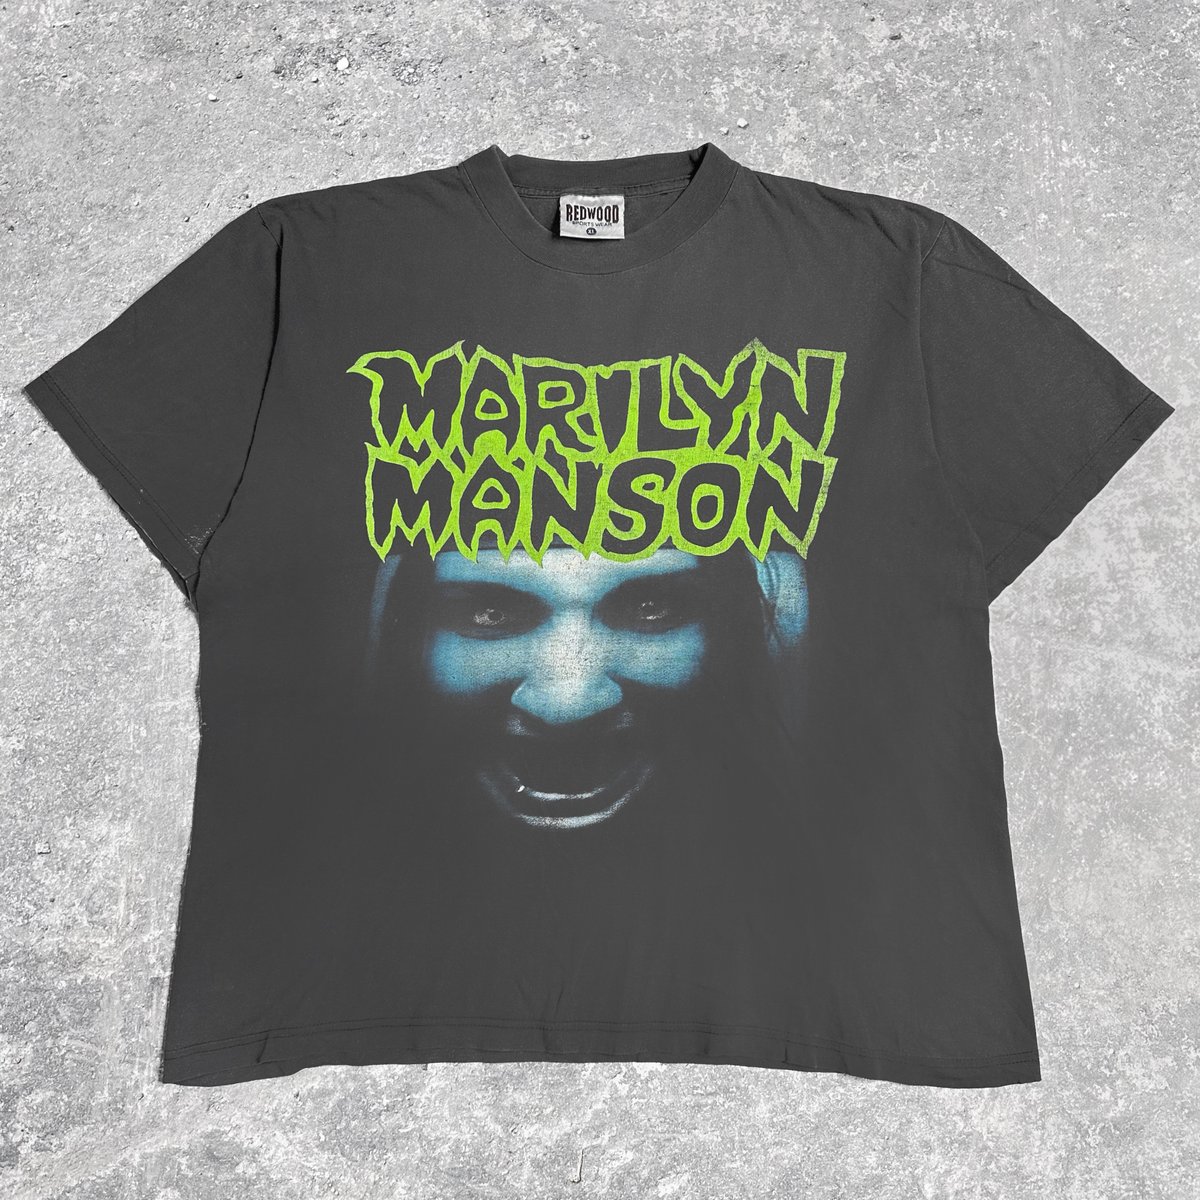 Marilyn Manson 1994 'This Is Your World' T-Shirt | NLVintage